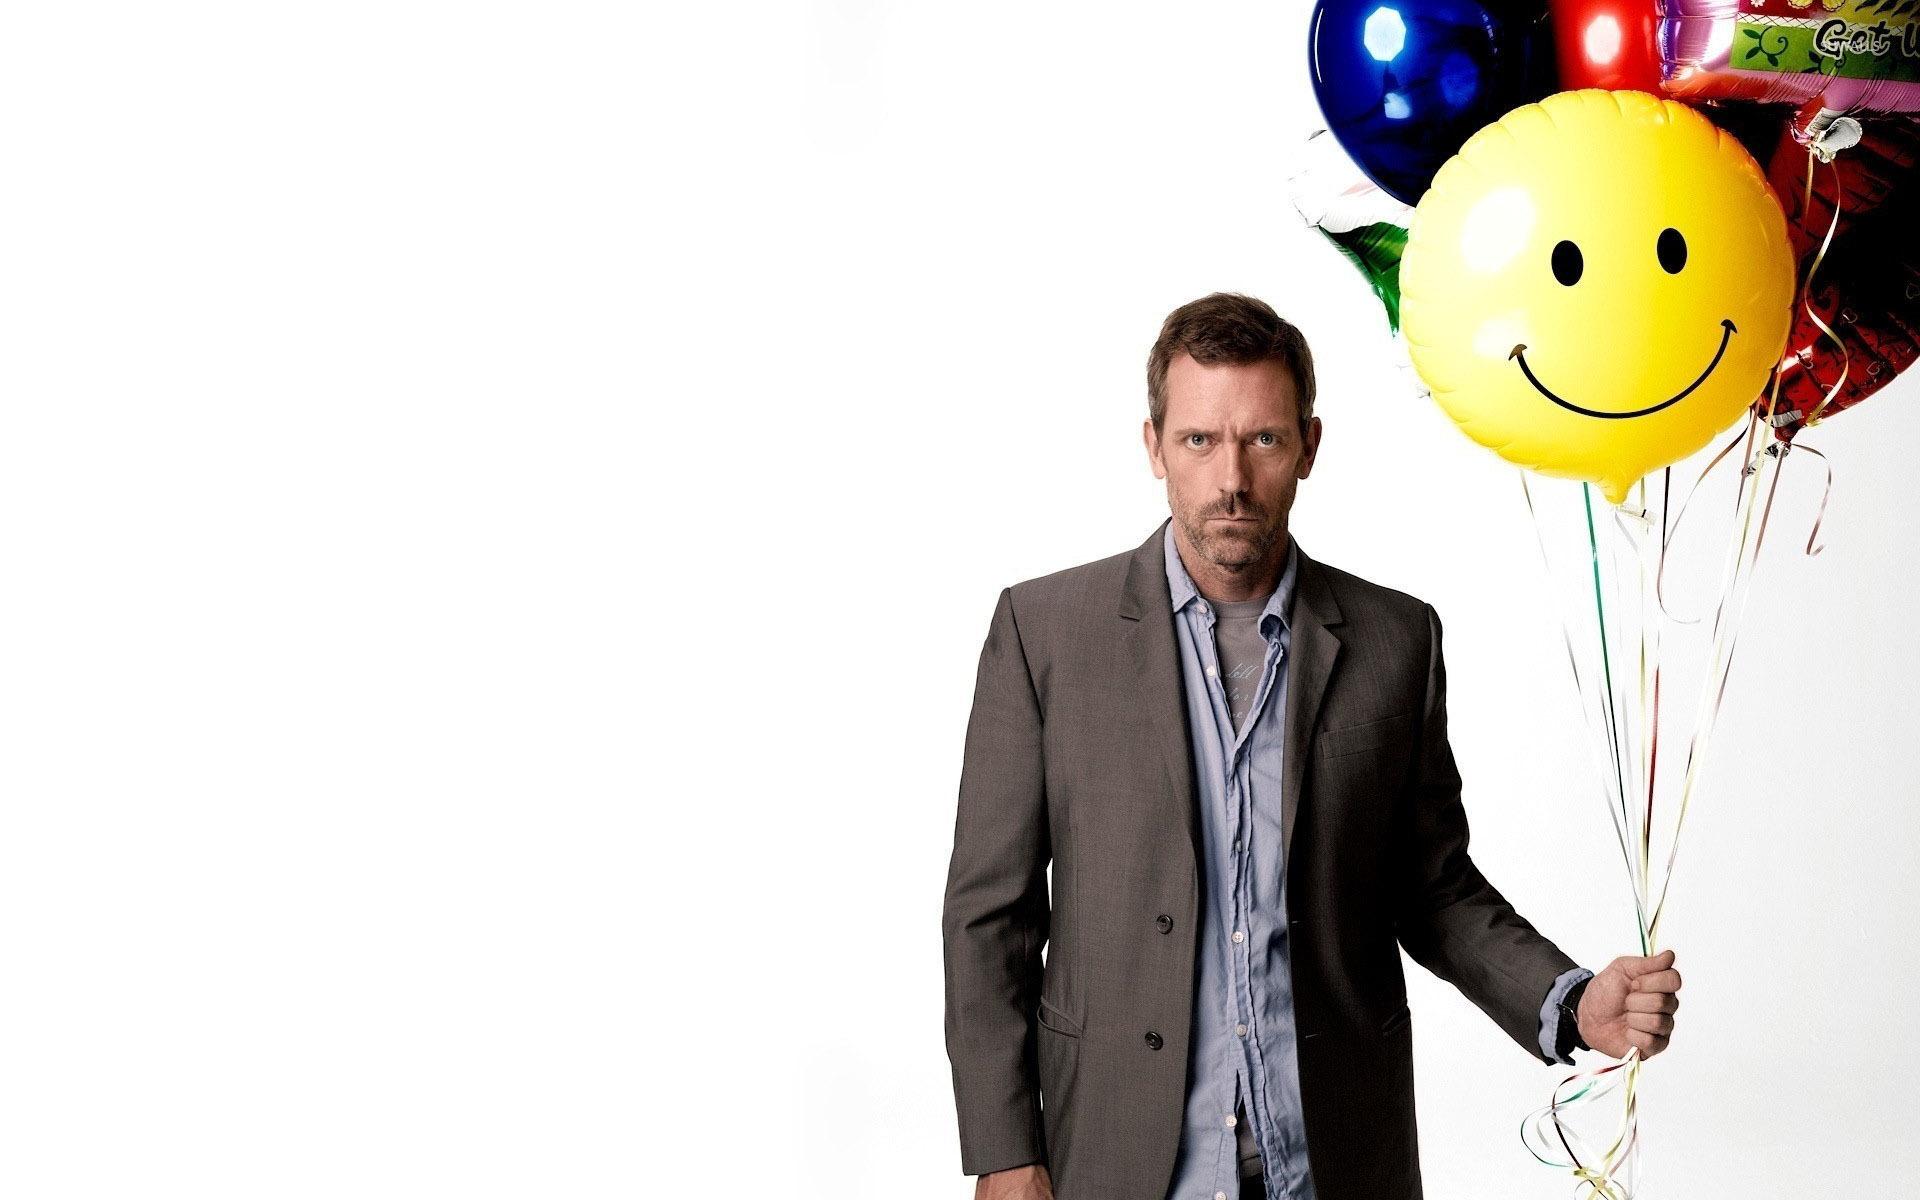 Dr. Gregory House with colorful balloons M.D. wallpaper Show wallpaper